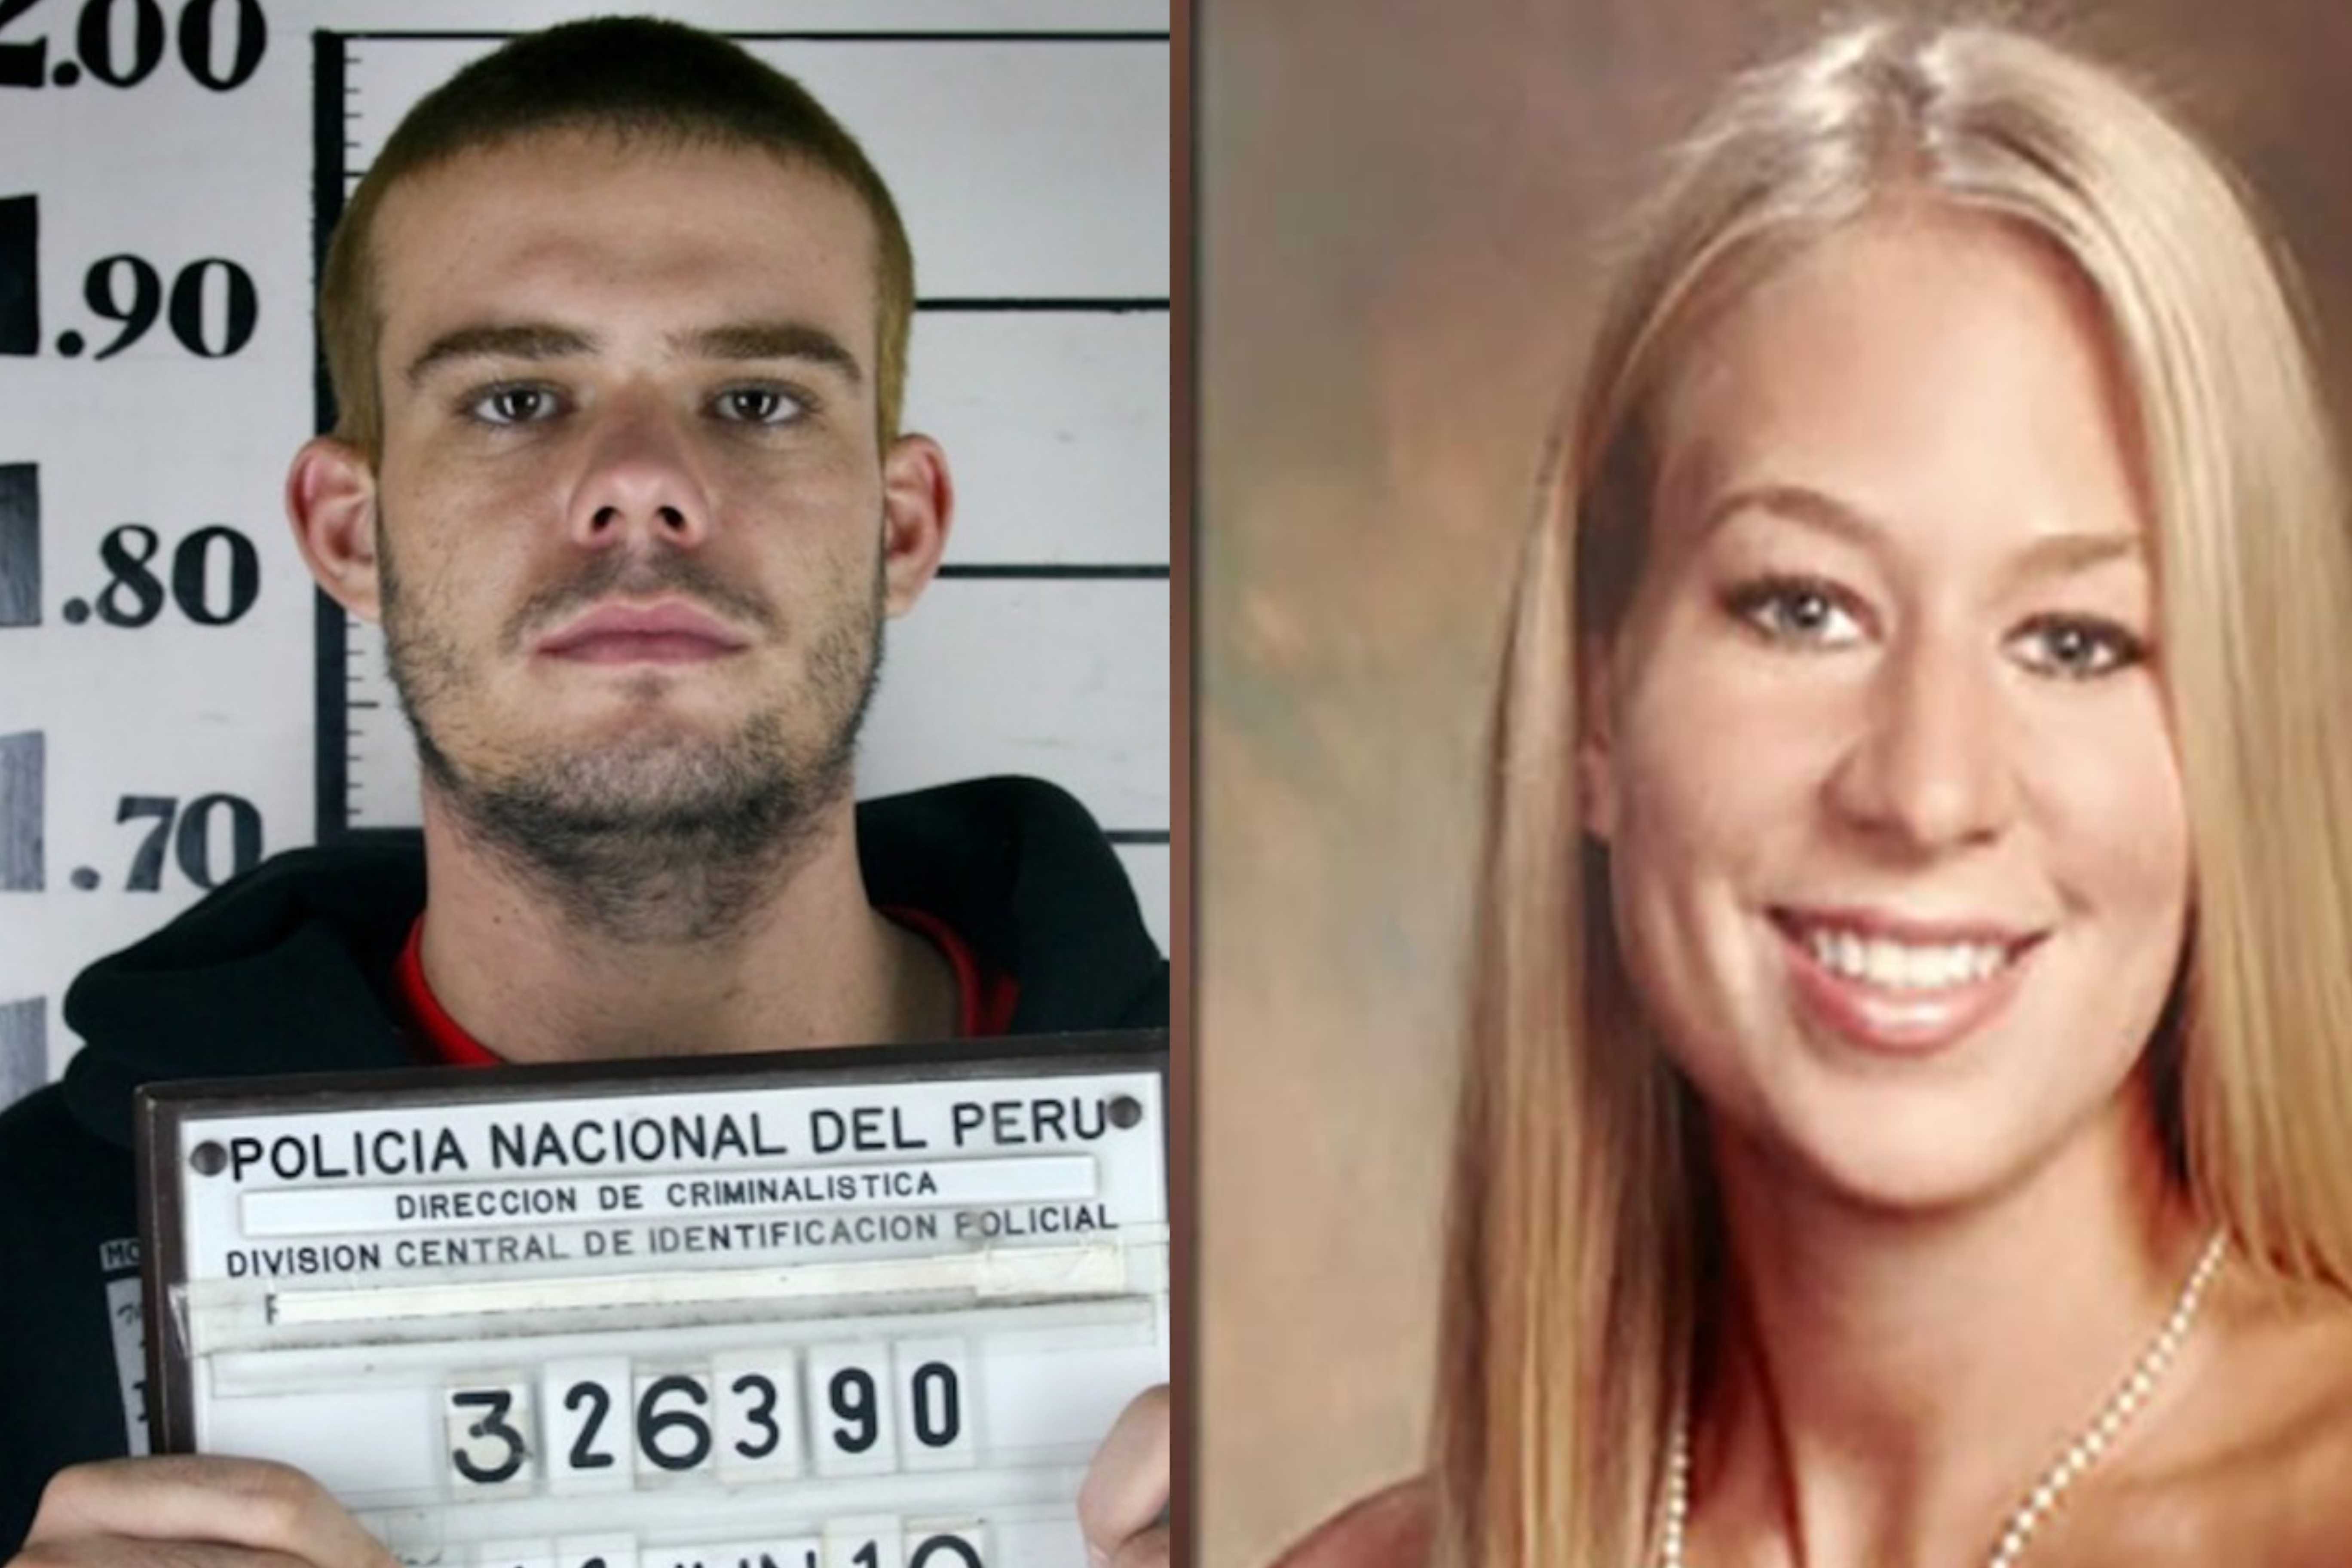 Prime Suspect for Alleged Extortion in Natalee Holloway Case, Joran van der Sloot, Moved from Peru Prison amidst Extradition Process